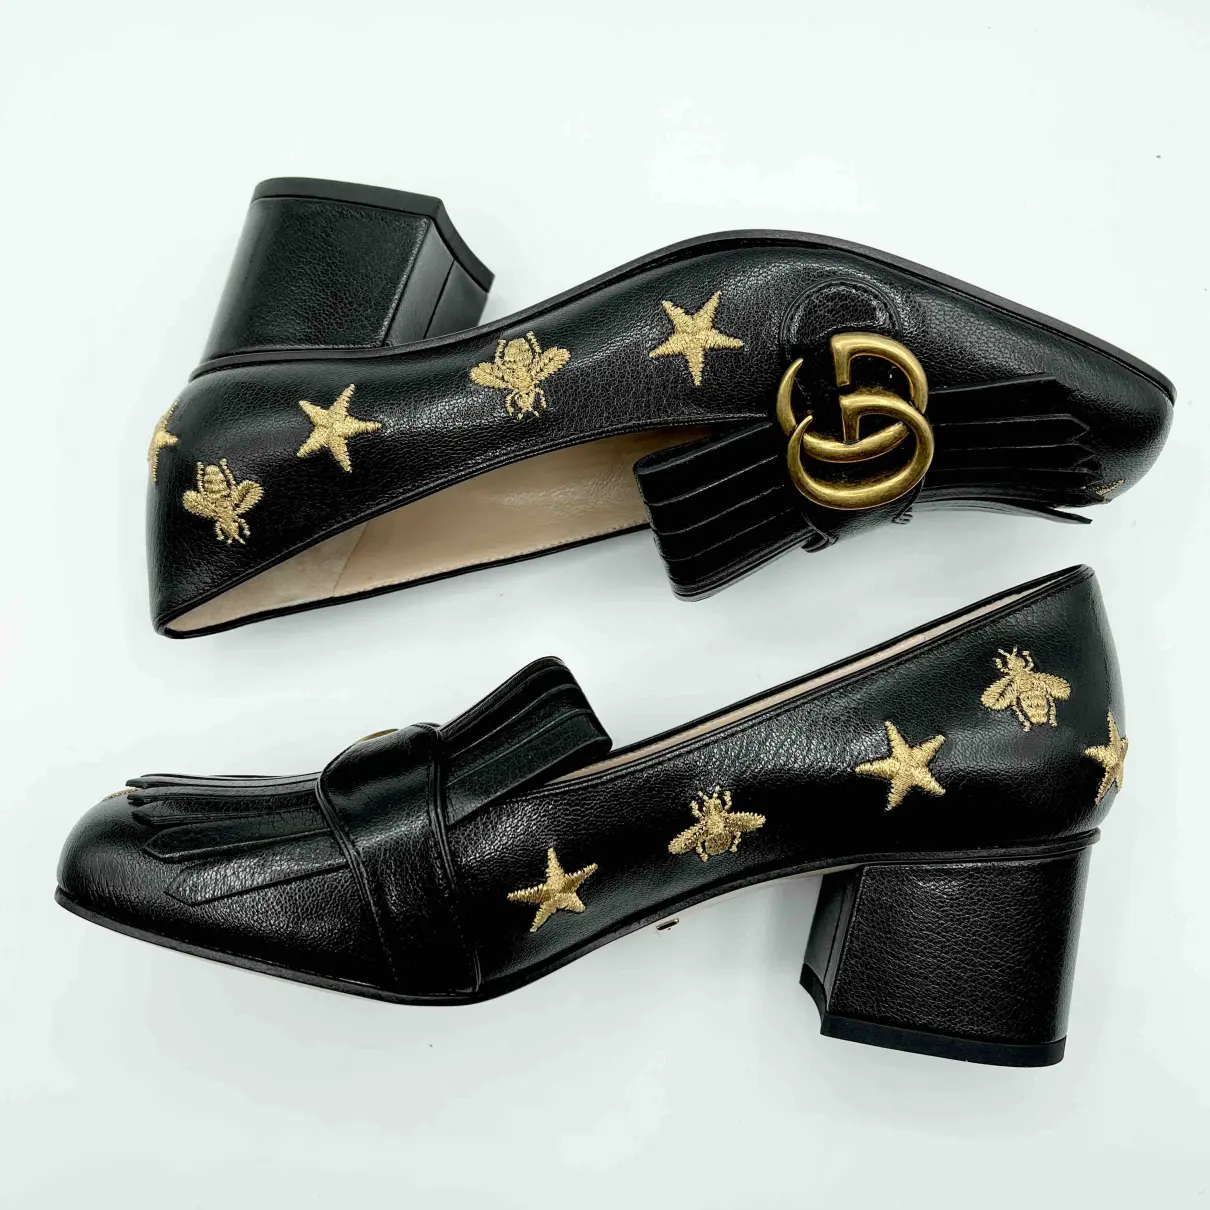 Buy Gucci Marmont leather heels online